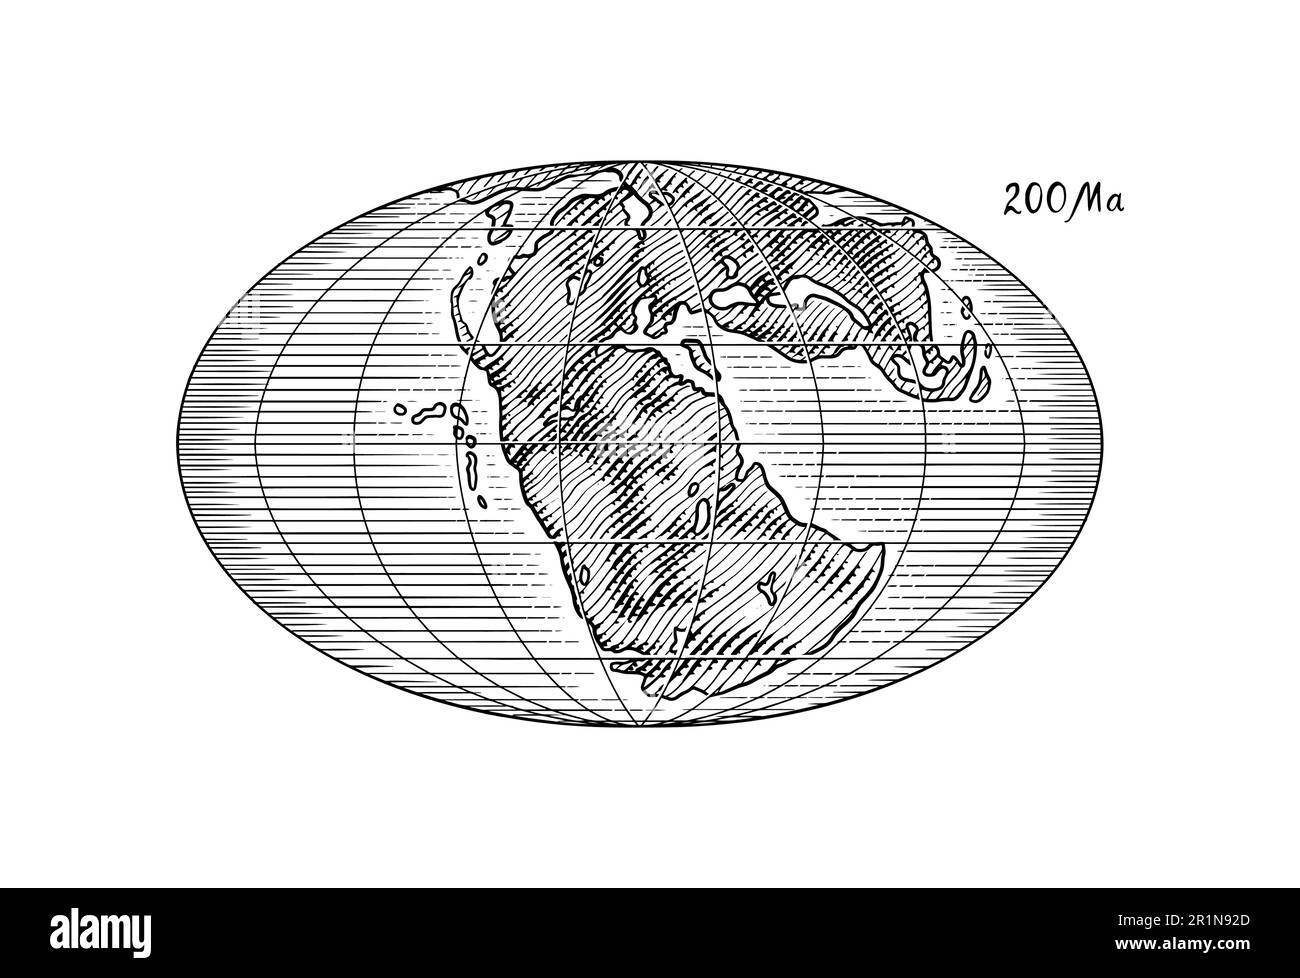 Plate tectonics on the planet Earth. Pangaea. Continental drift. Supercontinent at 200 Ma. Era of the dinosaurs. Jurassic period. Mesozoic. Hand drawn Stock Vector